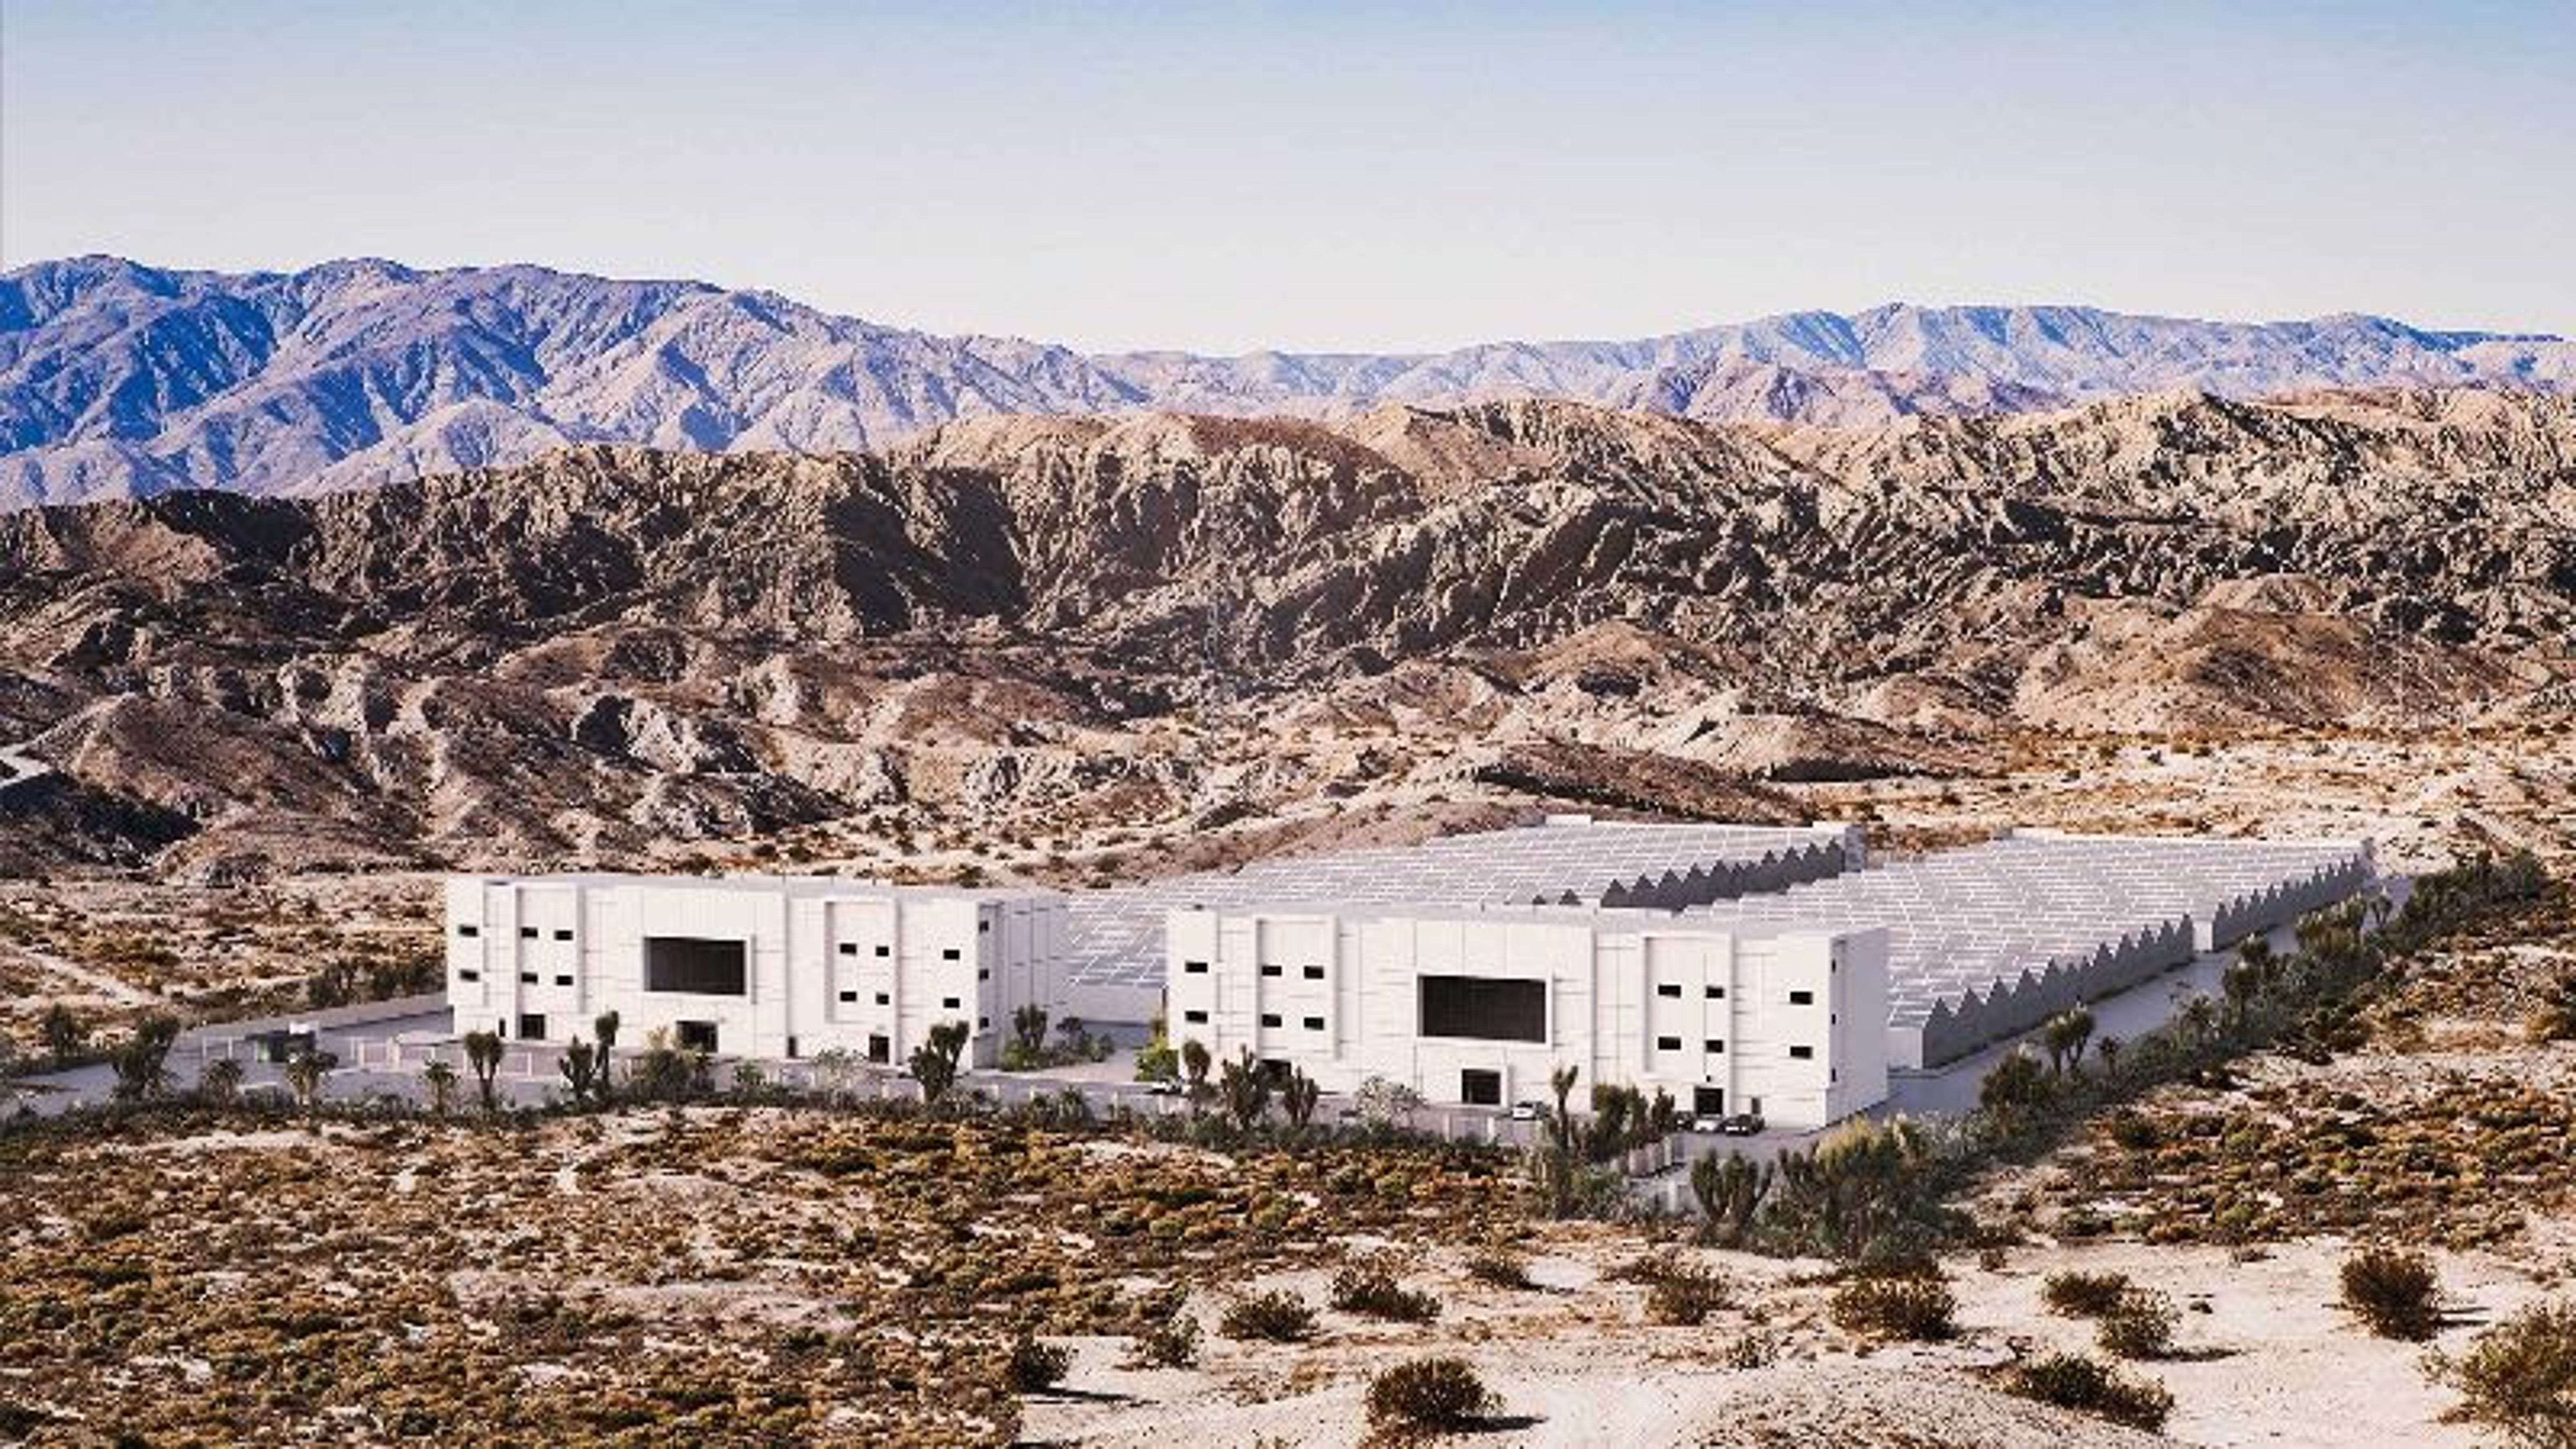 Green Horizons&#39; High Tech Grow Site: &#39;Make Coachella Valley To Cannabis What Silicon Valley Is To Tech&#39;